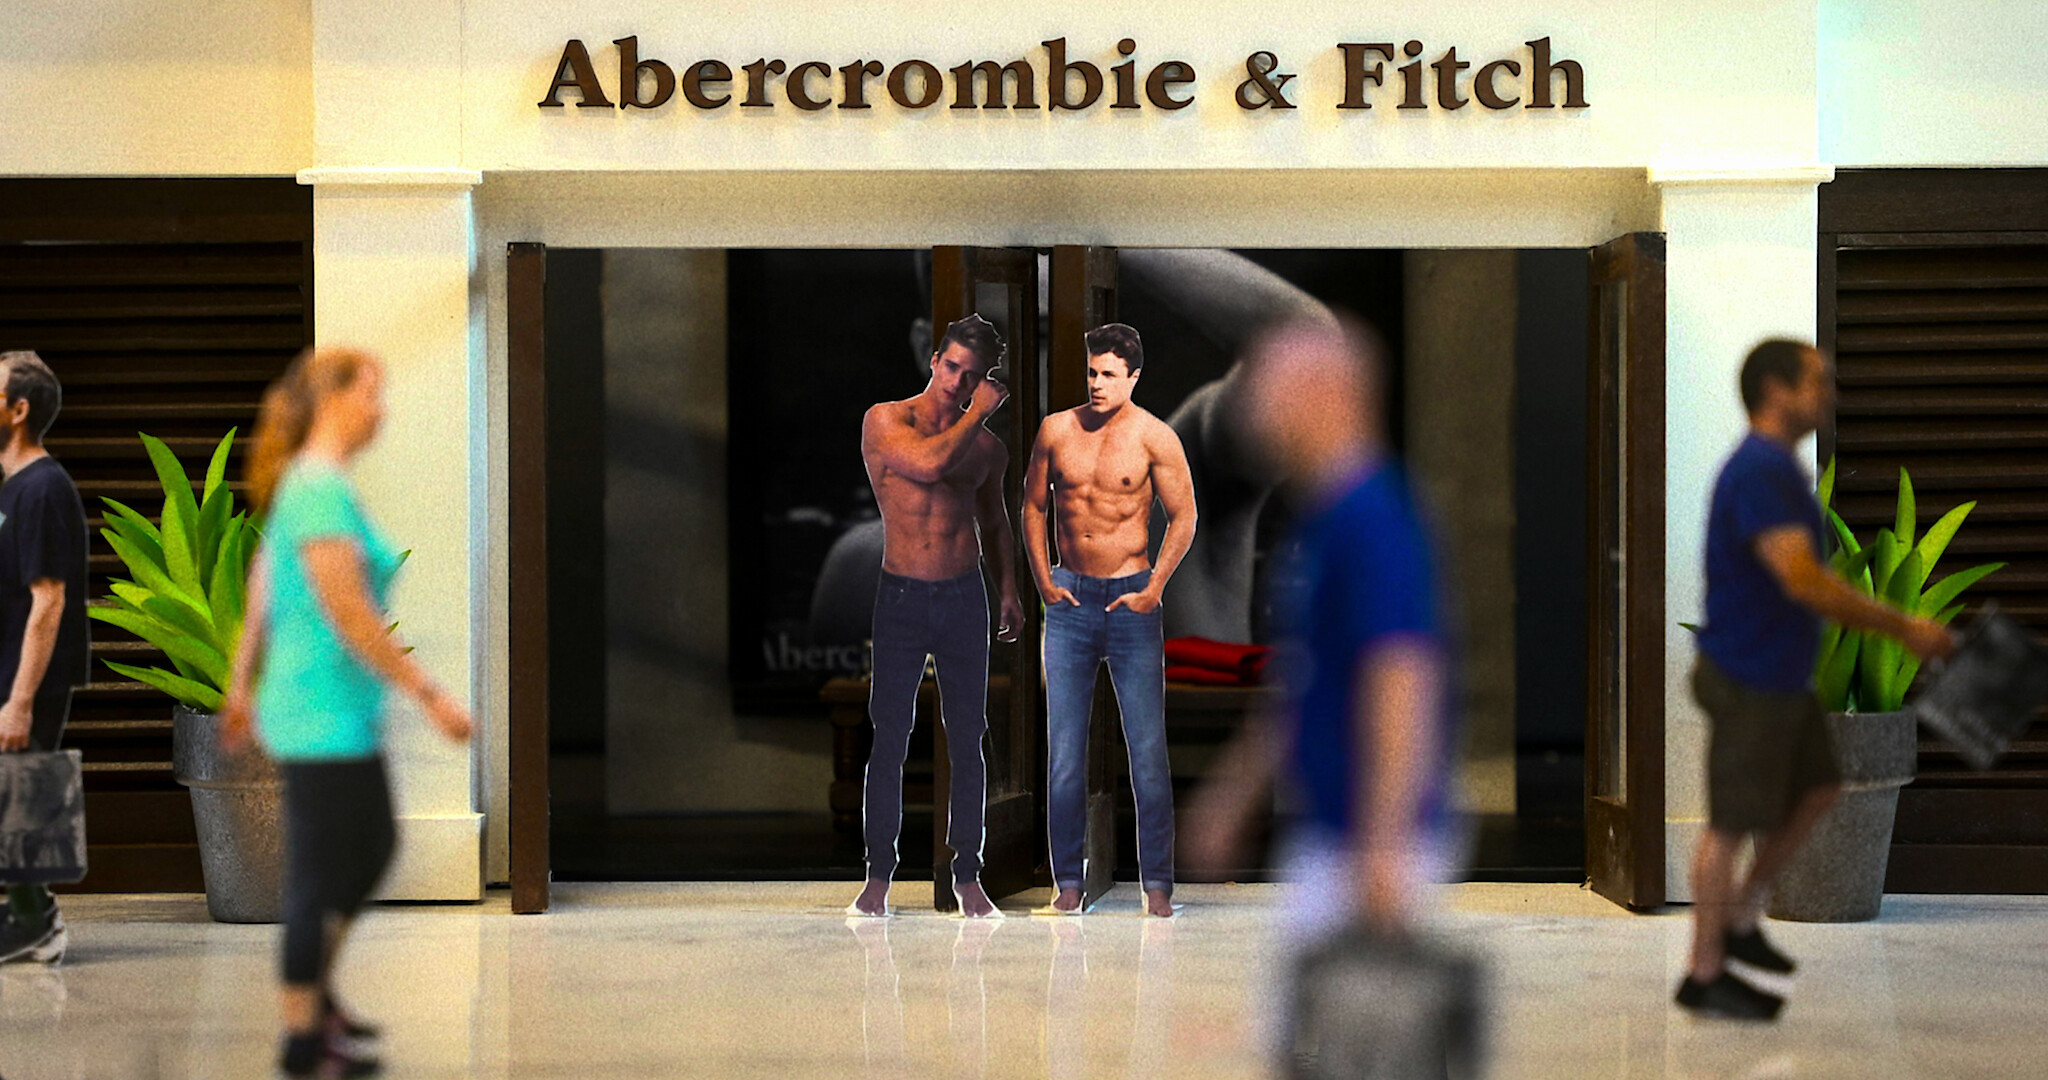 An Oral History of Shopping at Abercrombie and Fitch